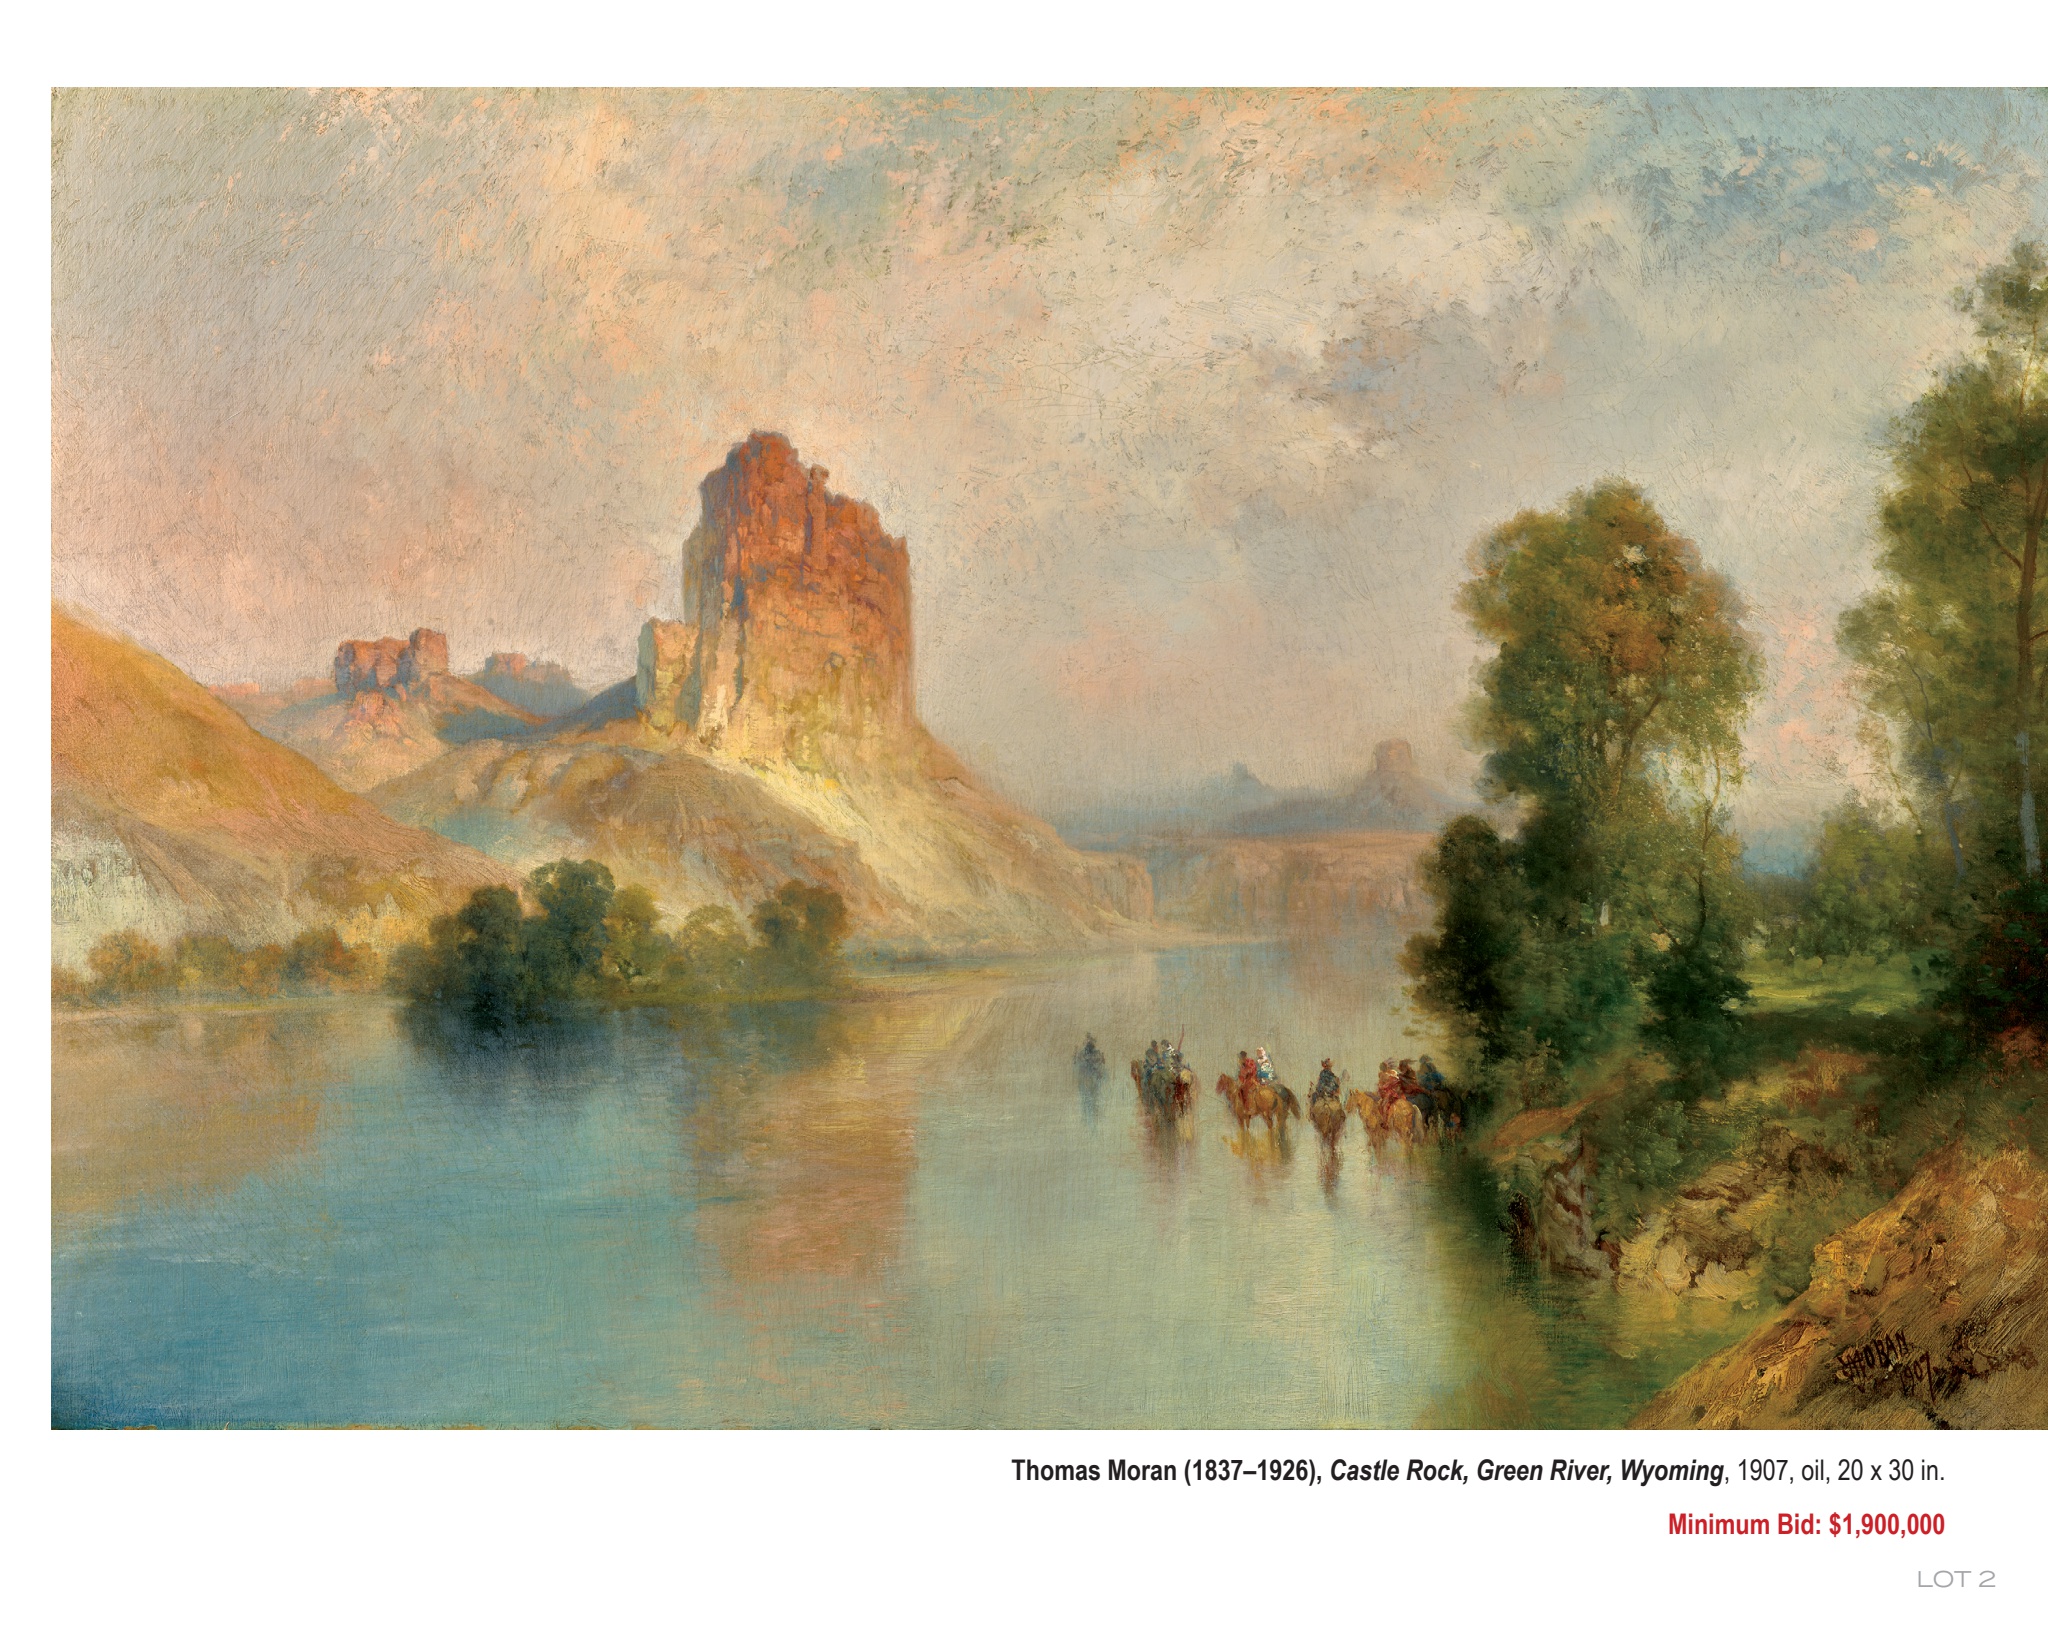 Castle Rock, Green River, Wyoming (1907)